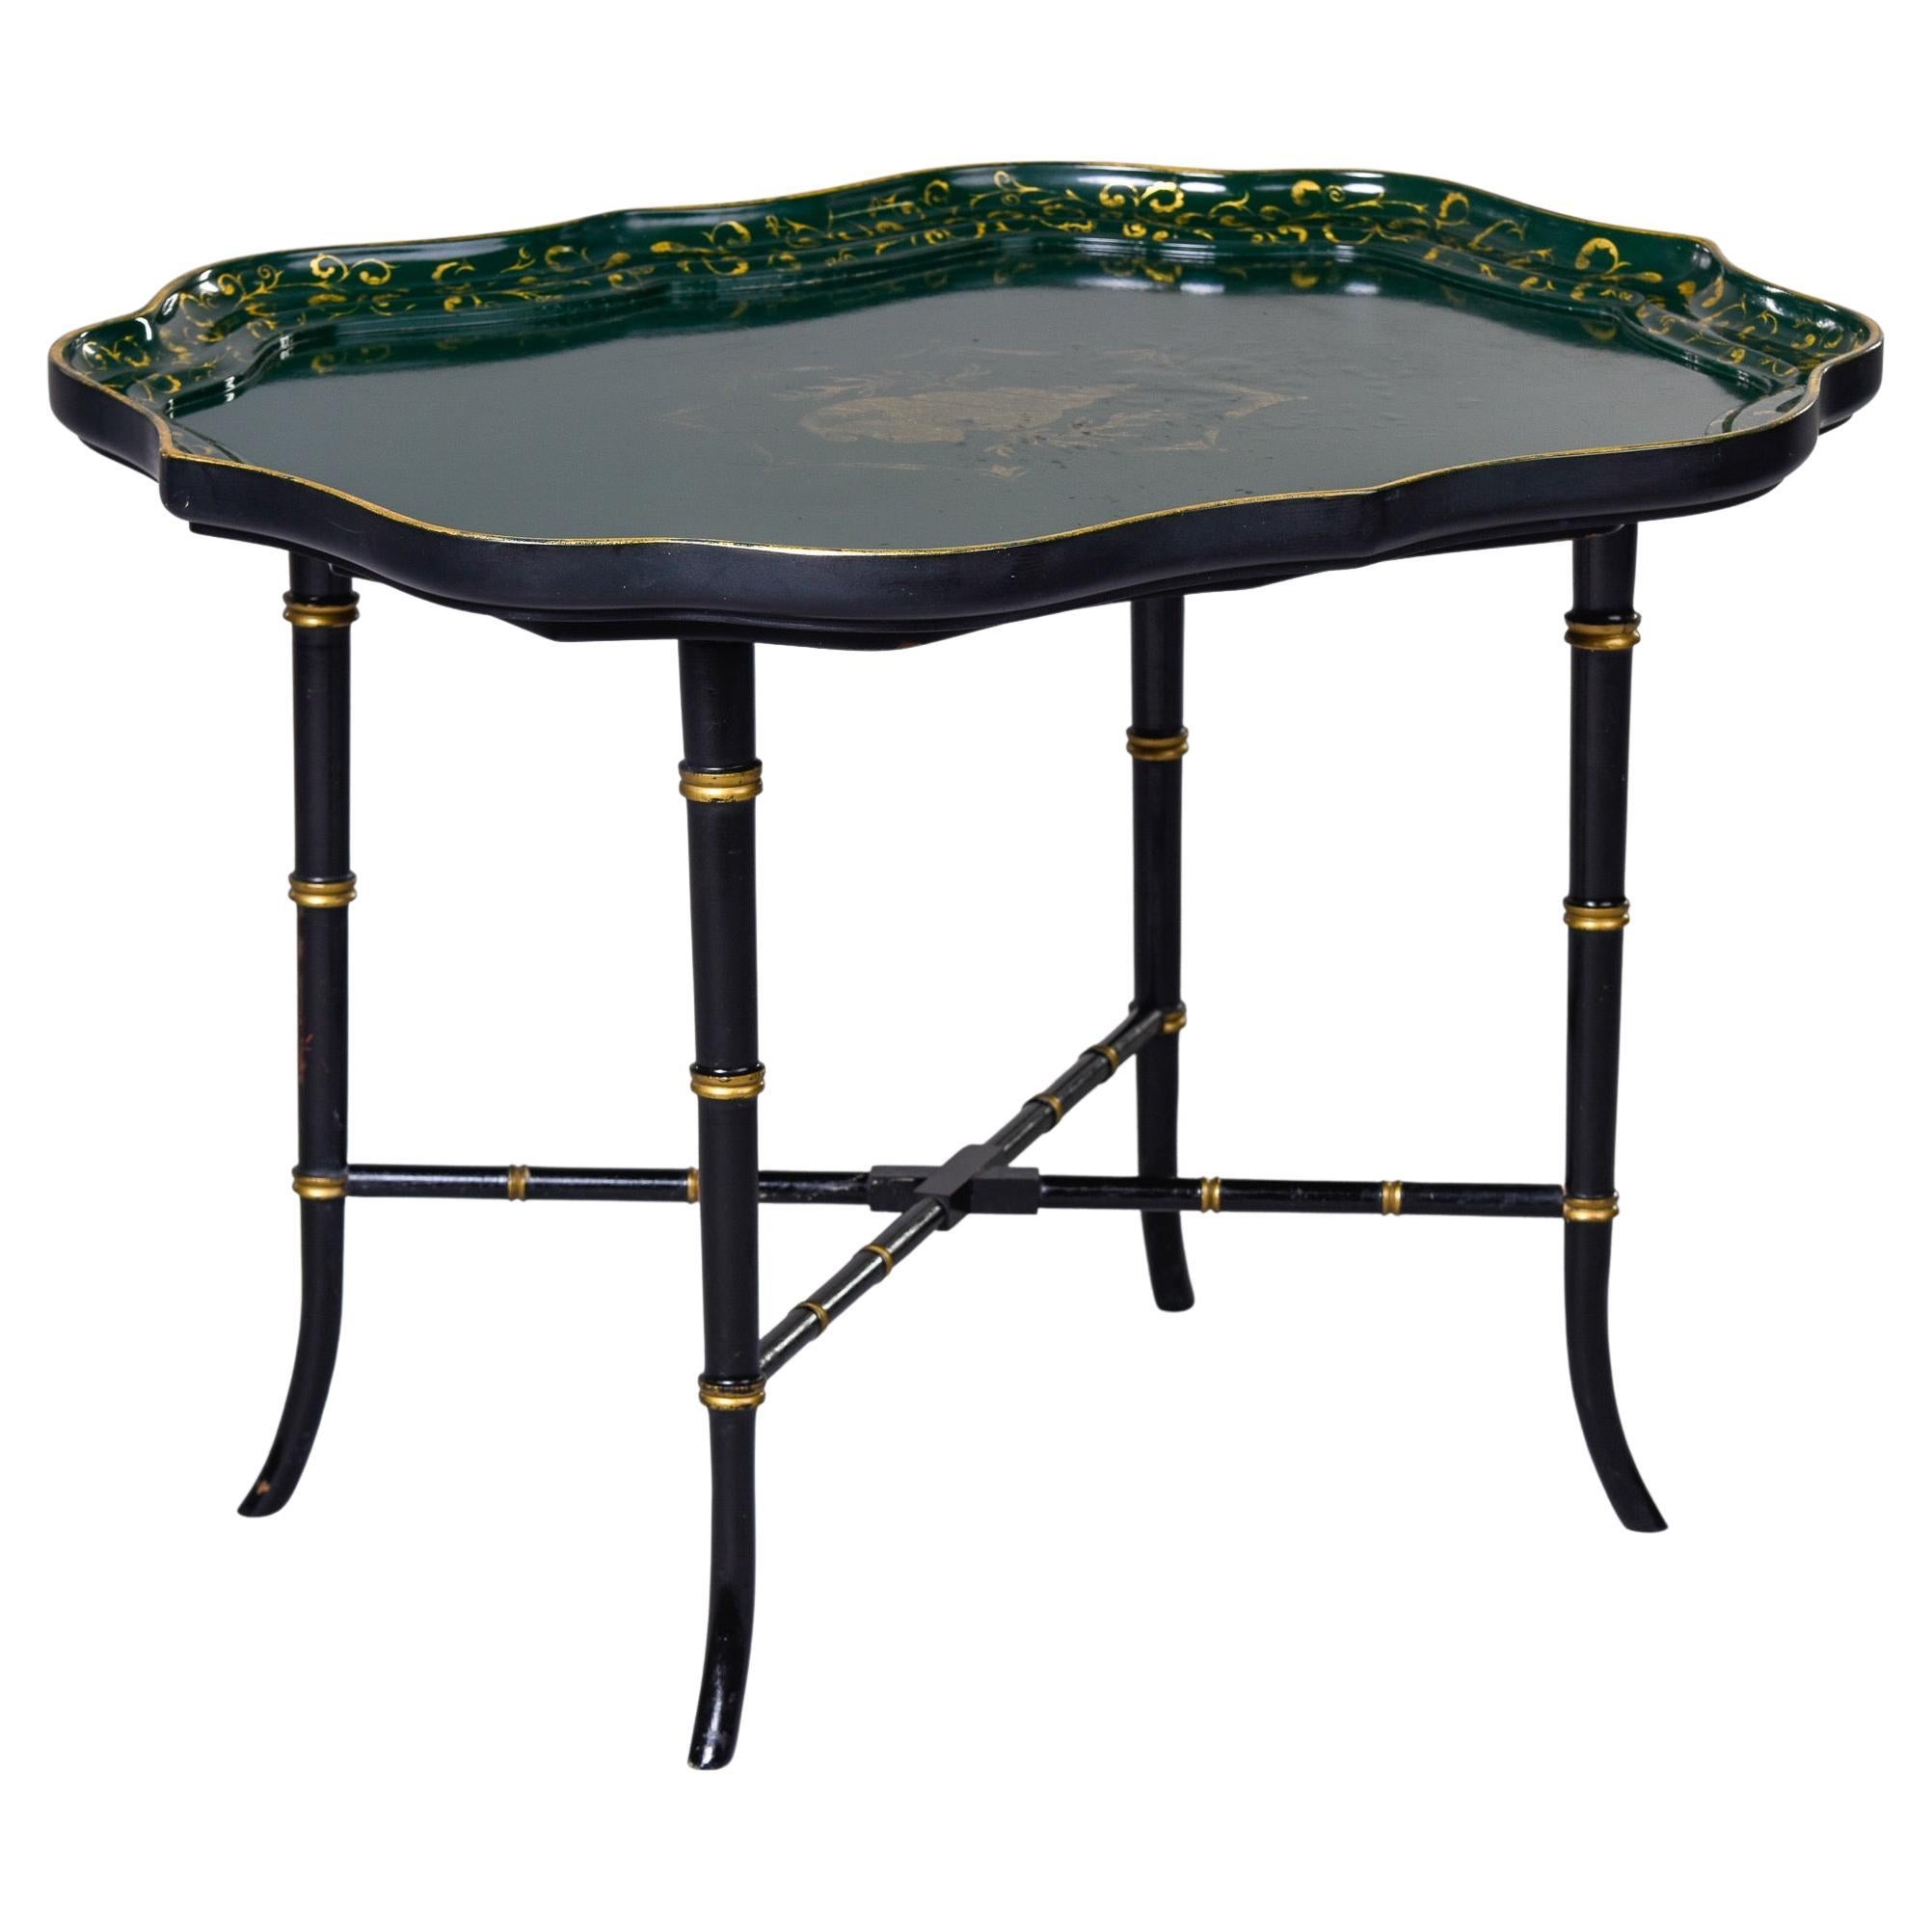 Imagination seng enorm Circa 1930s English Tray Top Table with Faux Bamboo Base For Sale at 1stDibs